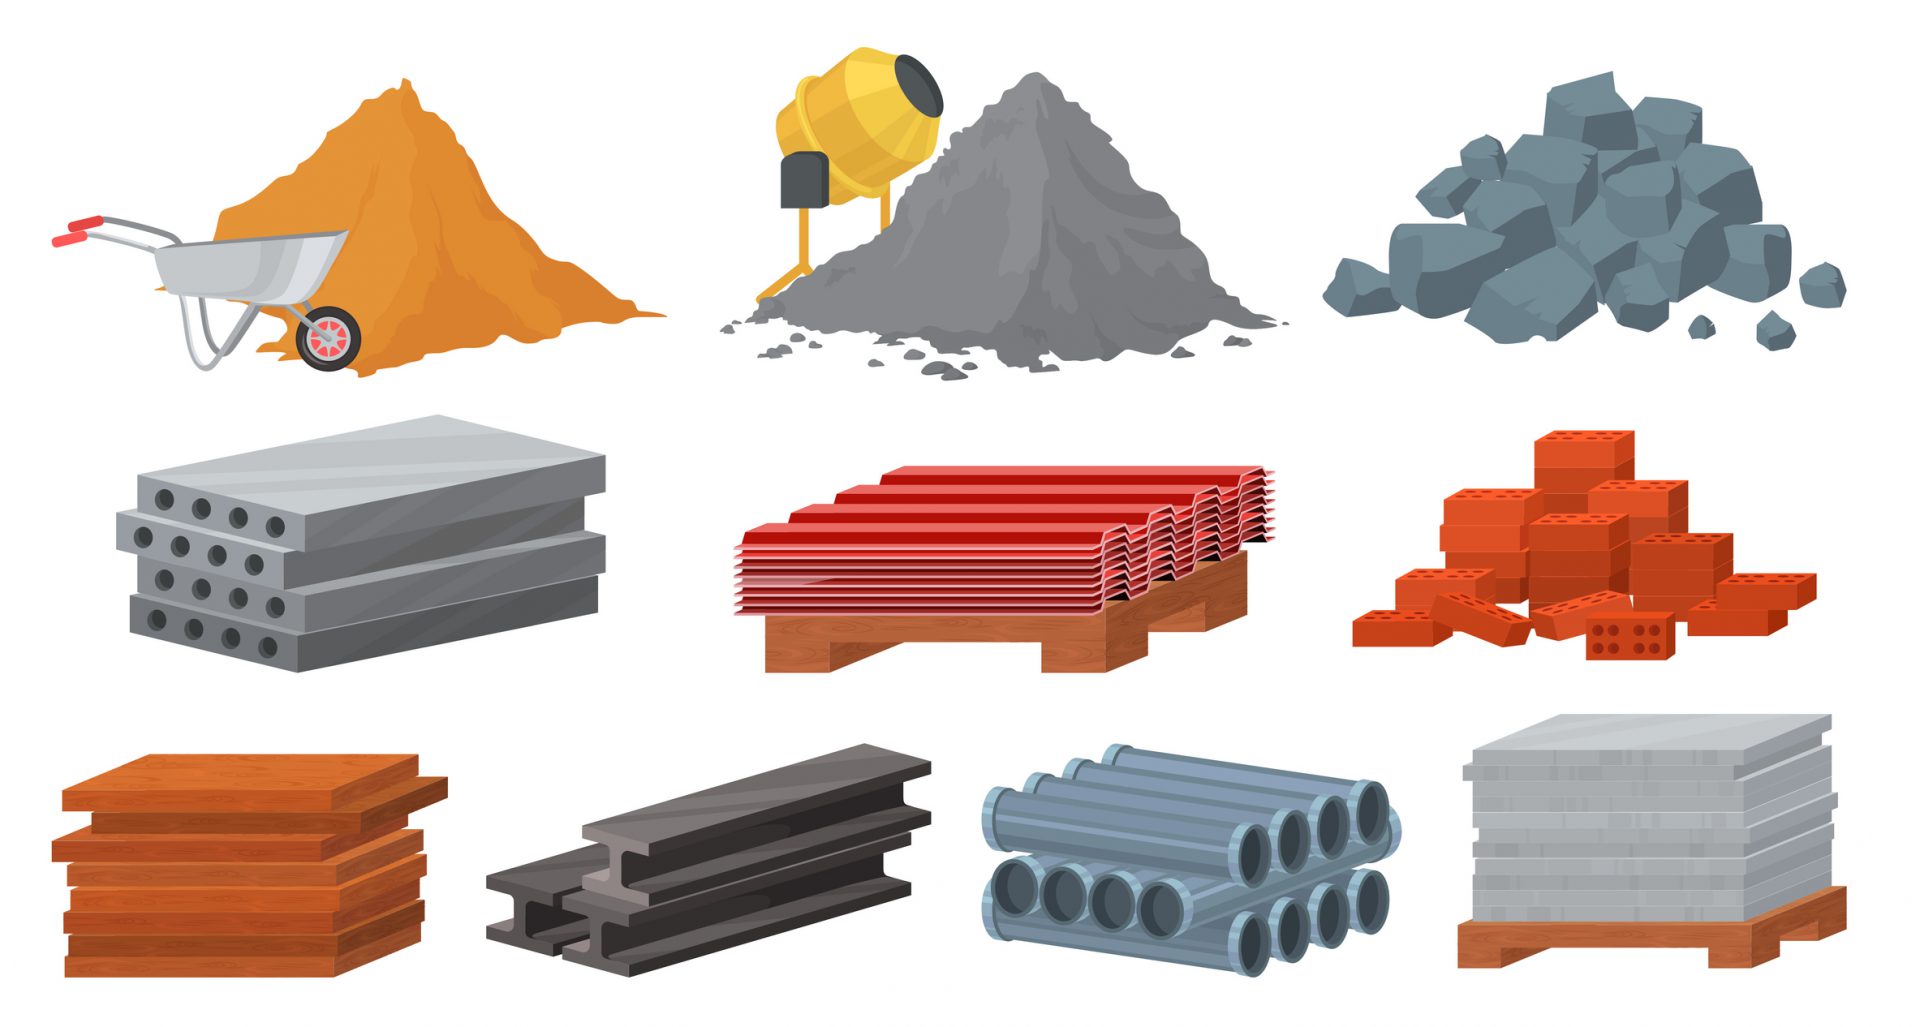 Construction materials set, flat vector illustration. Pile of sand, cement, stones, bricks. Concrete mixer. Stack of gypsum blocks, metal roof, tile, wooden planks. Materials for building industry.